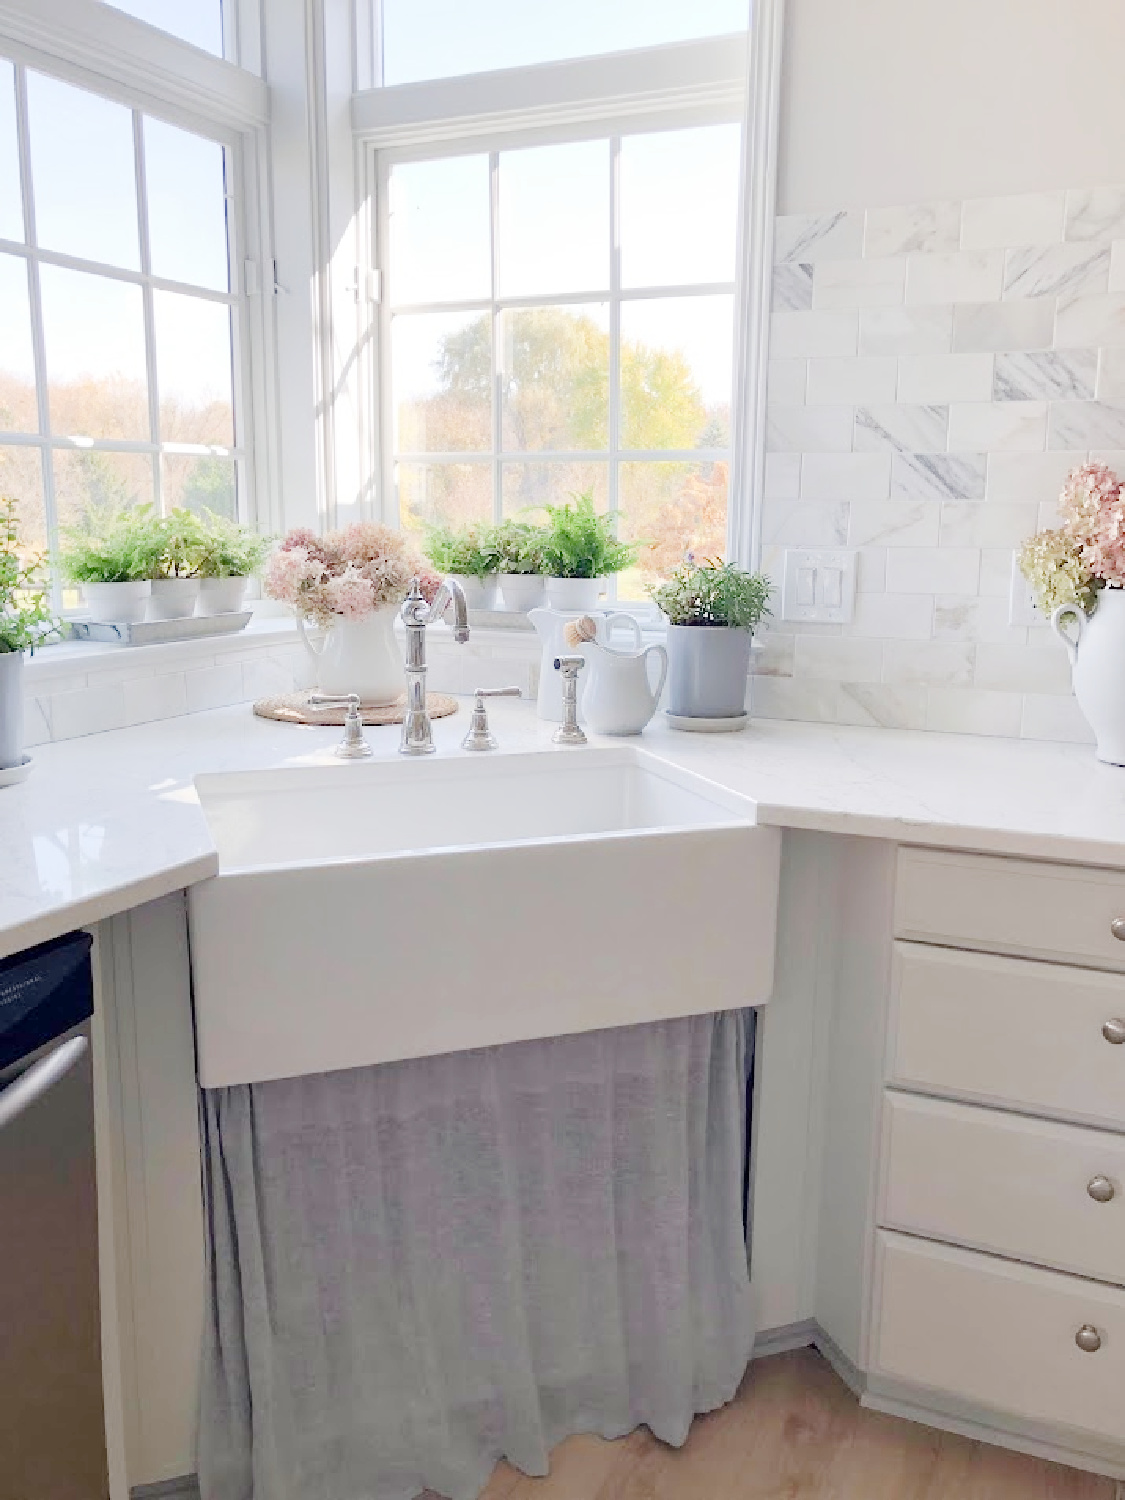 Renovated kitchen with Viatera Muse countertops and Sherwin Williams Eider White paint color. Cabinets are 50% Farrow & Ball Pavilion Gray - Hello Lovely Studio.